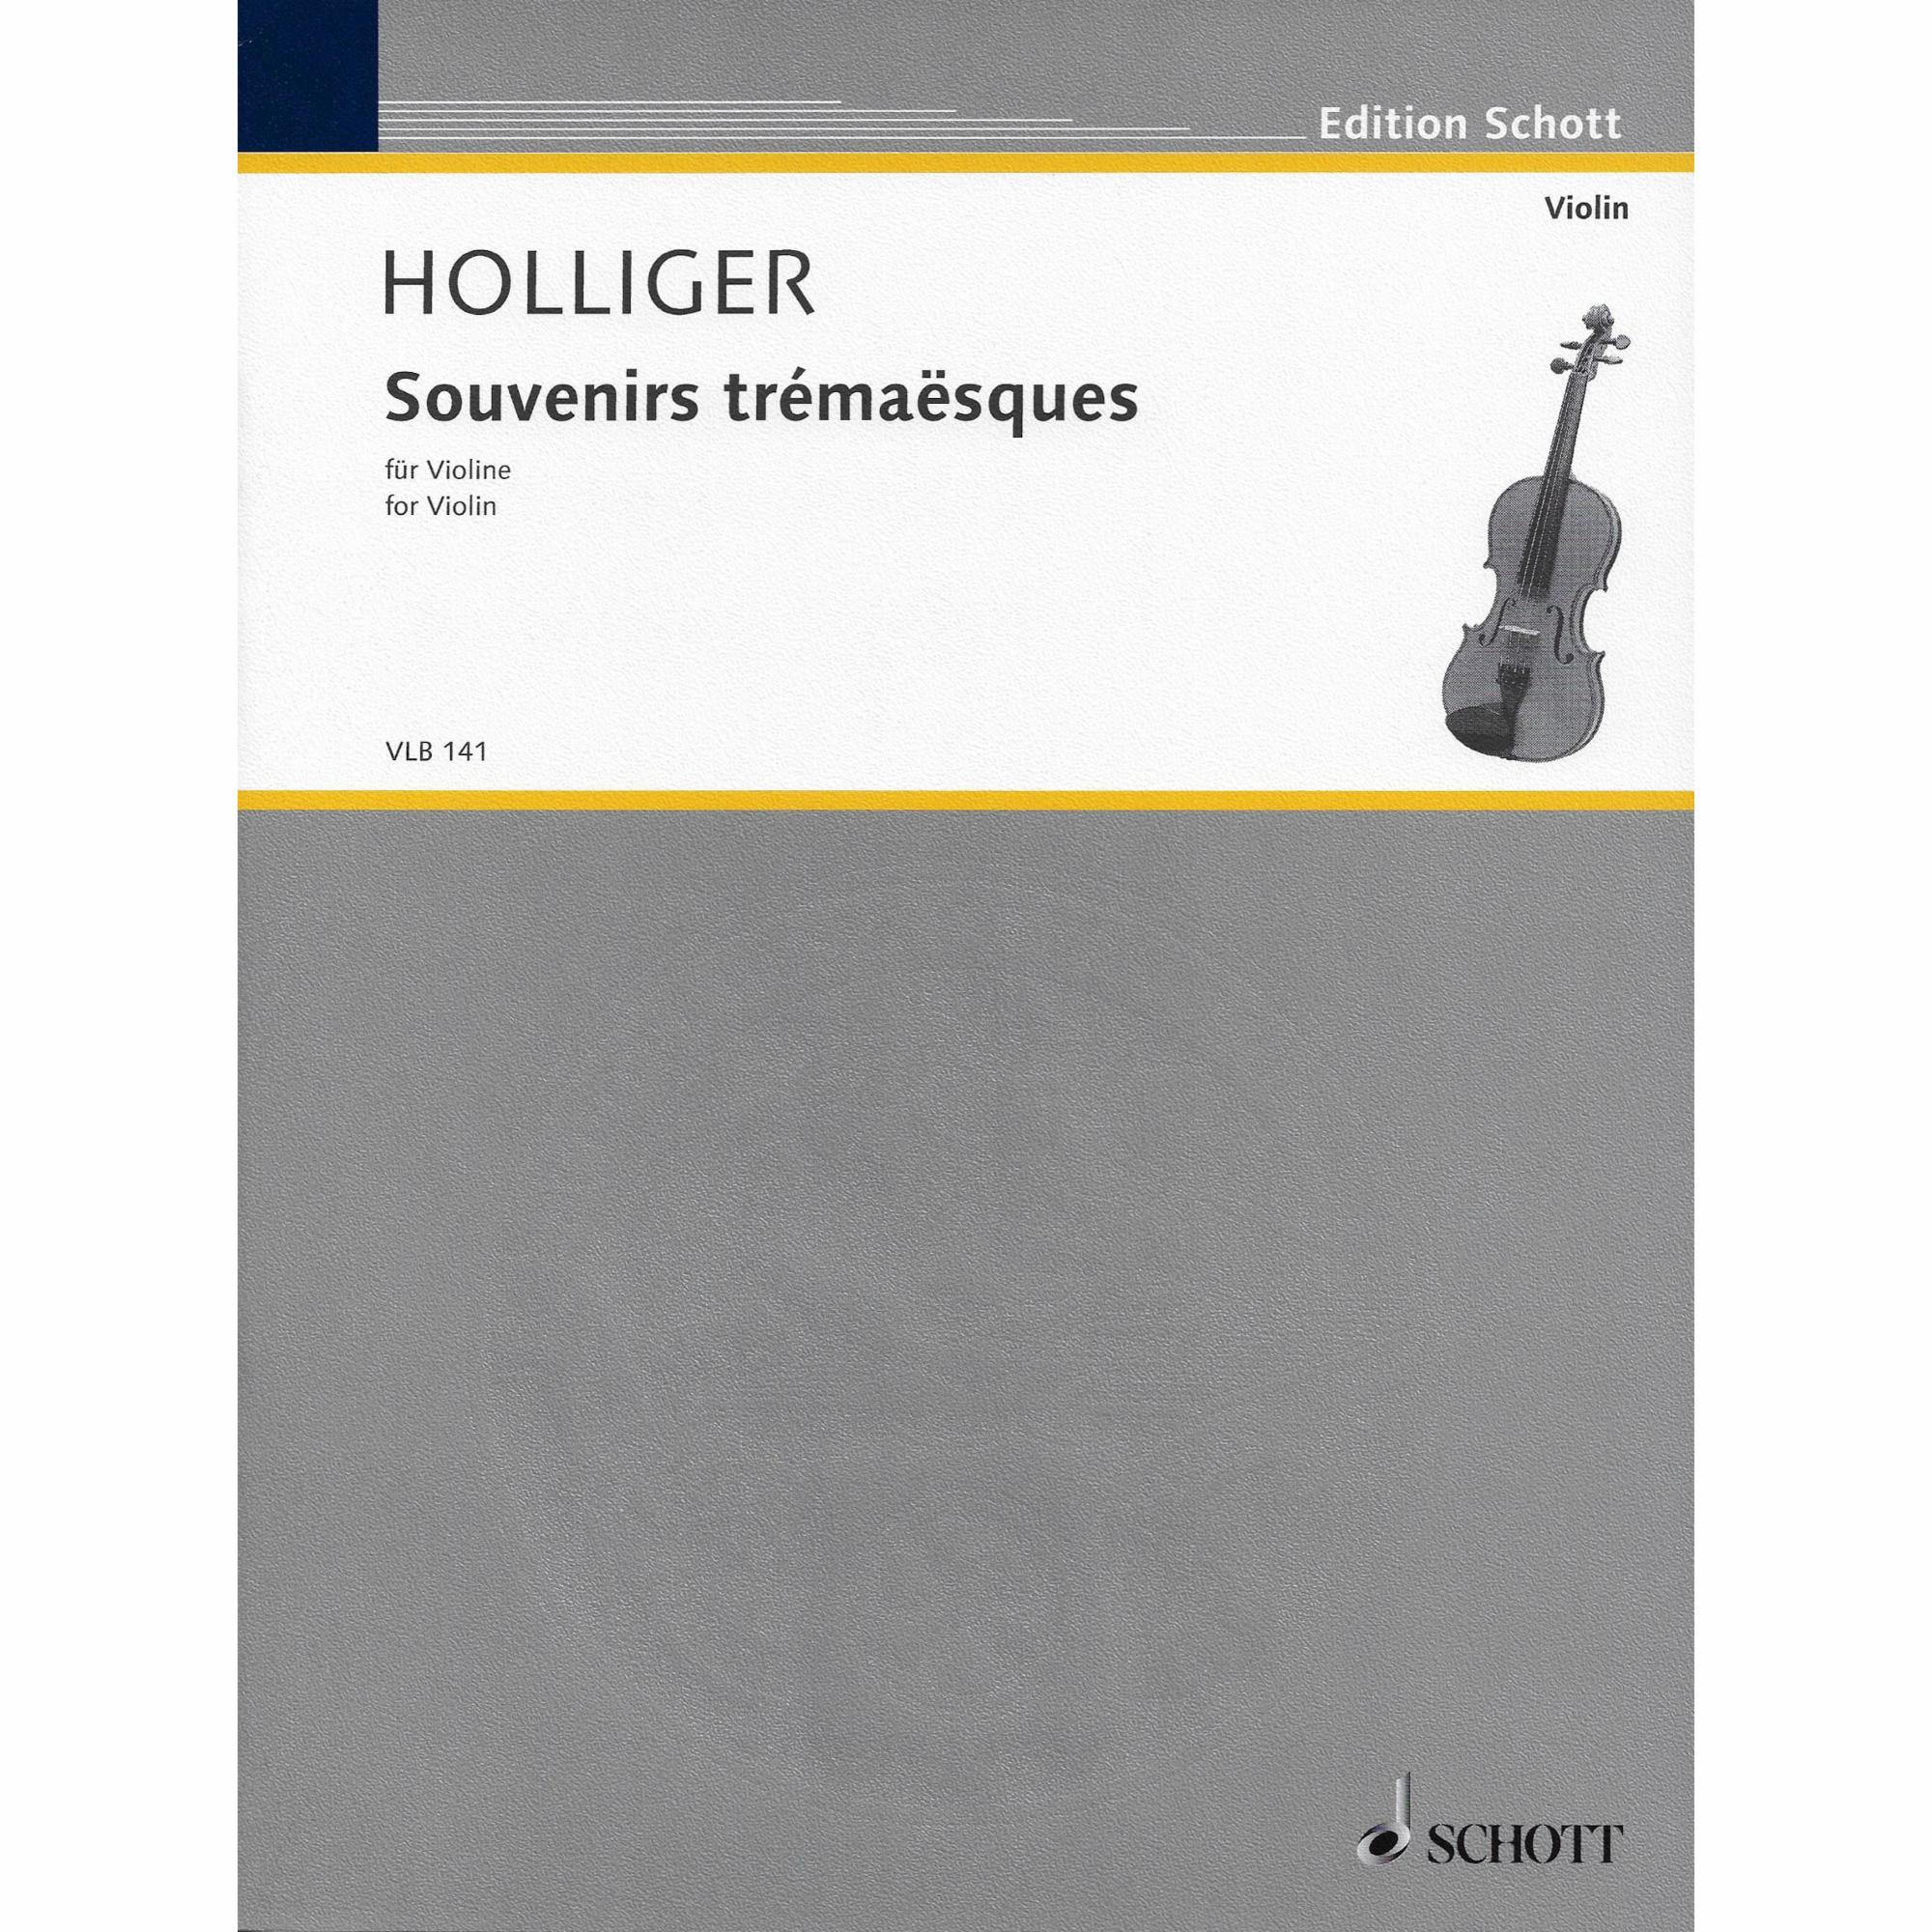 Holliger -- Souvenirs tremaesques for Solo Violin